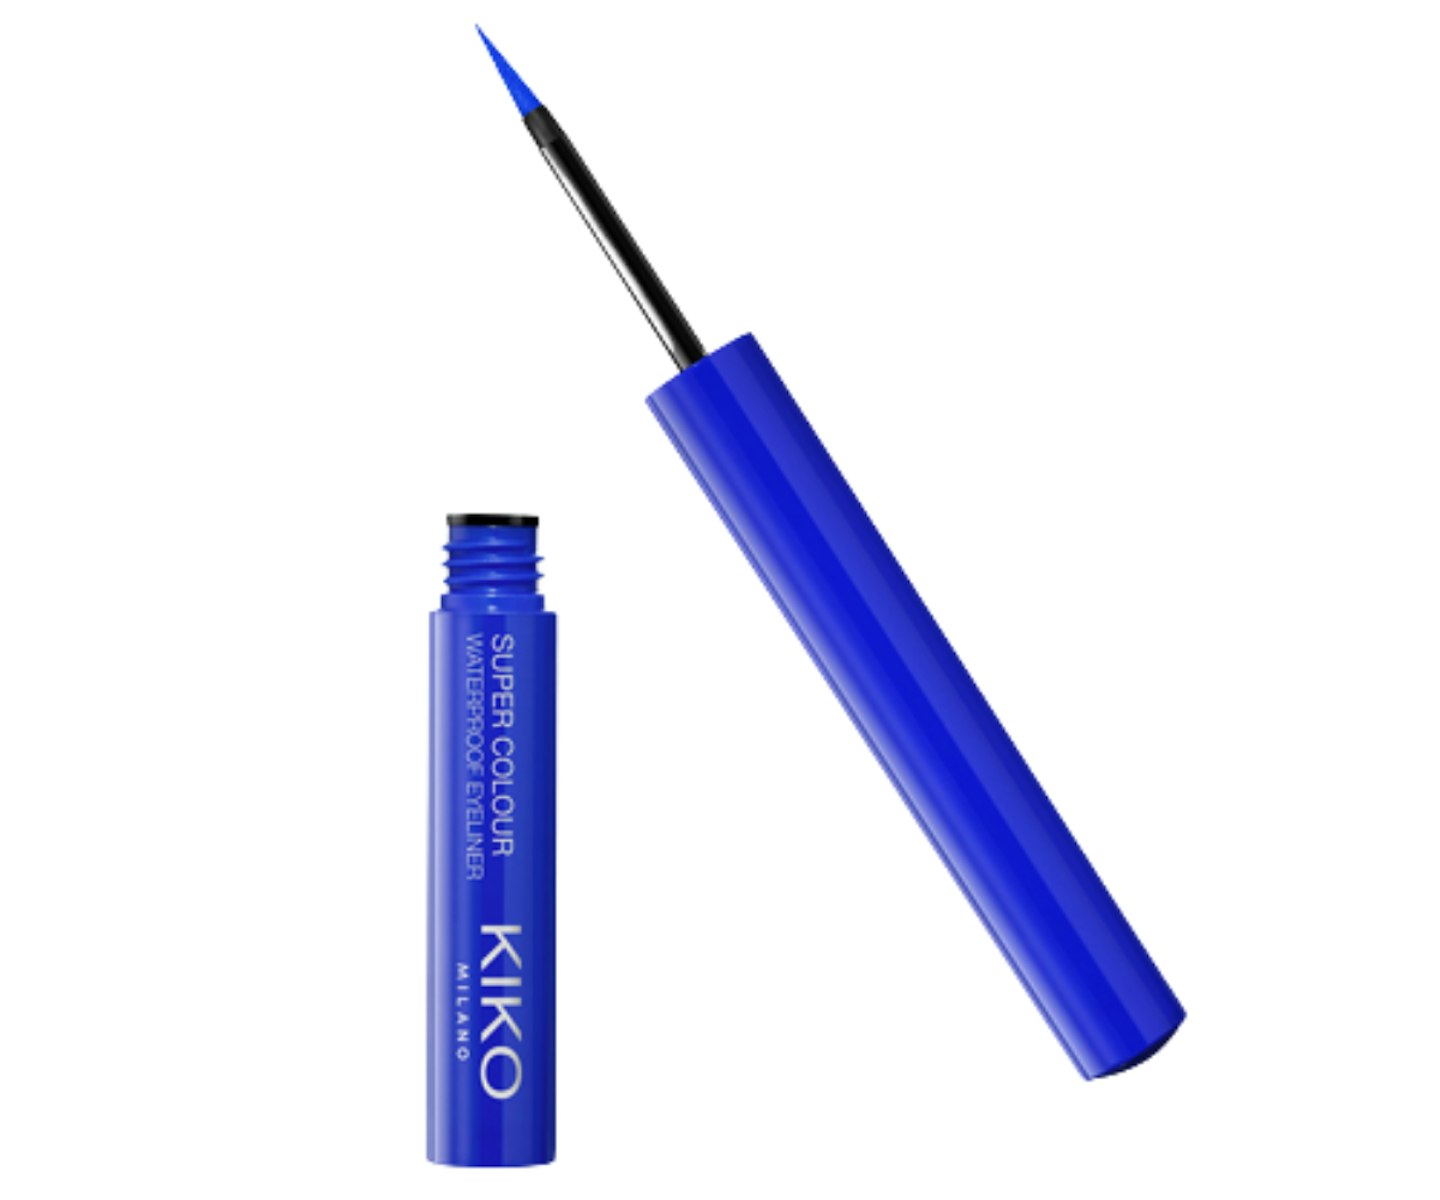 A picture of the KIKO Super Colour Waterproof Eyeliner in Blue.